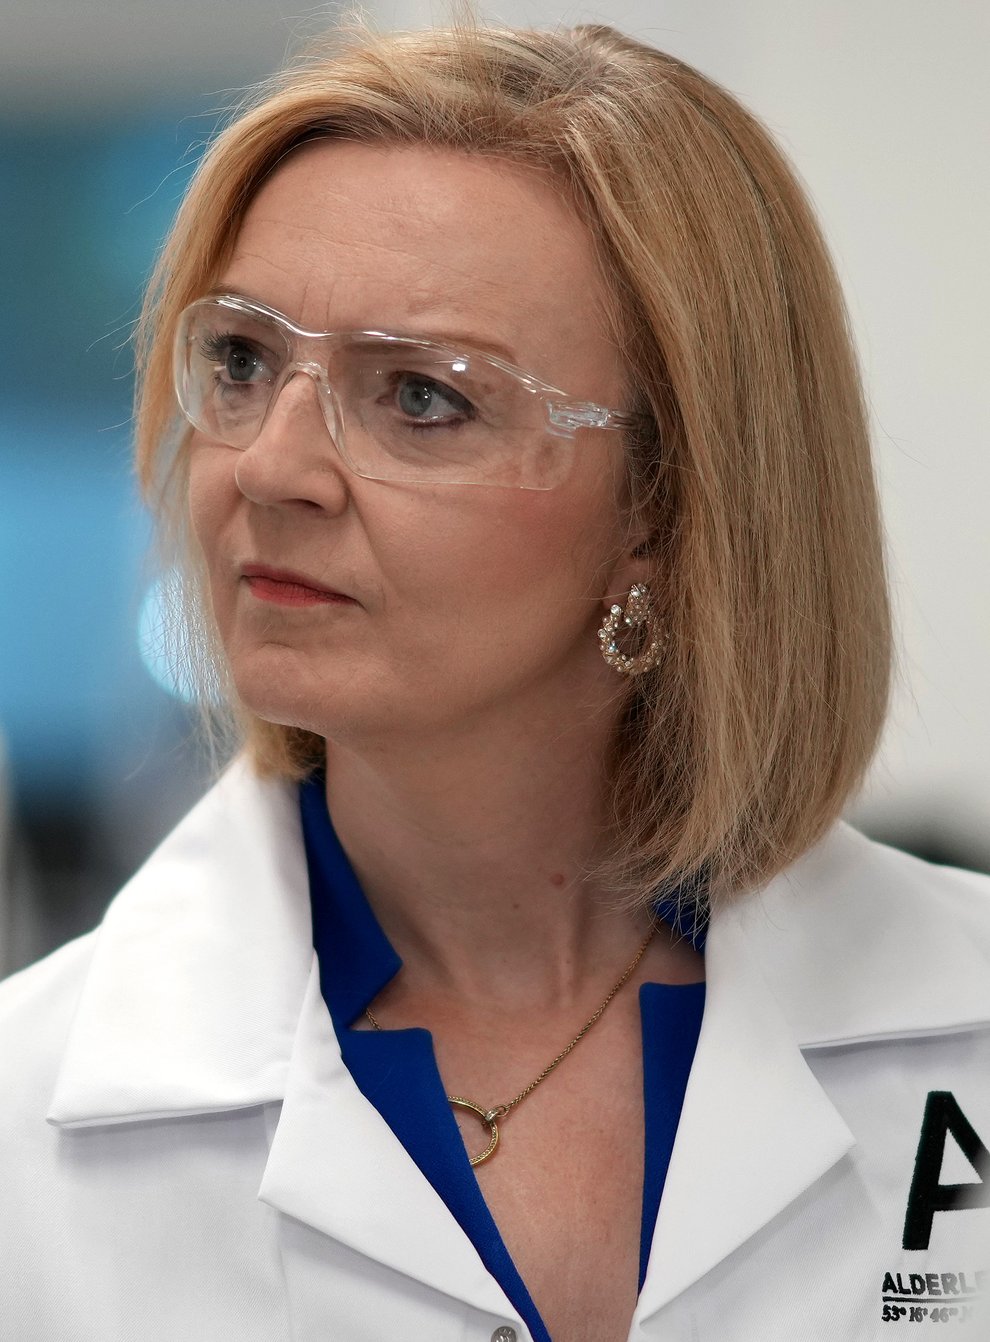 Liz Truss speaks to scientists during a campaign visit to a life sciences laboratory at Alderley Park in Manchester, as part of the campaign to be leader of the Conservative Party and the next prime minister. Picture date: Wednesday August 10, 2022.